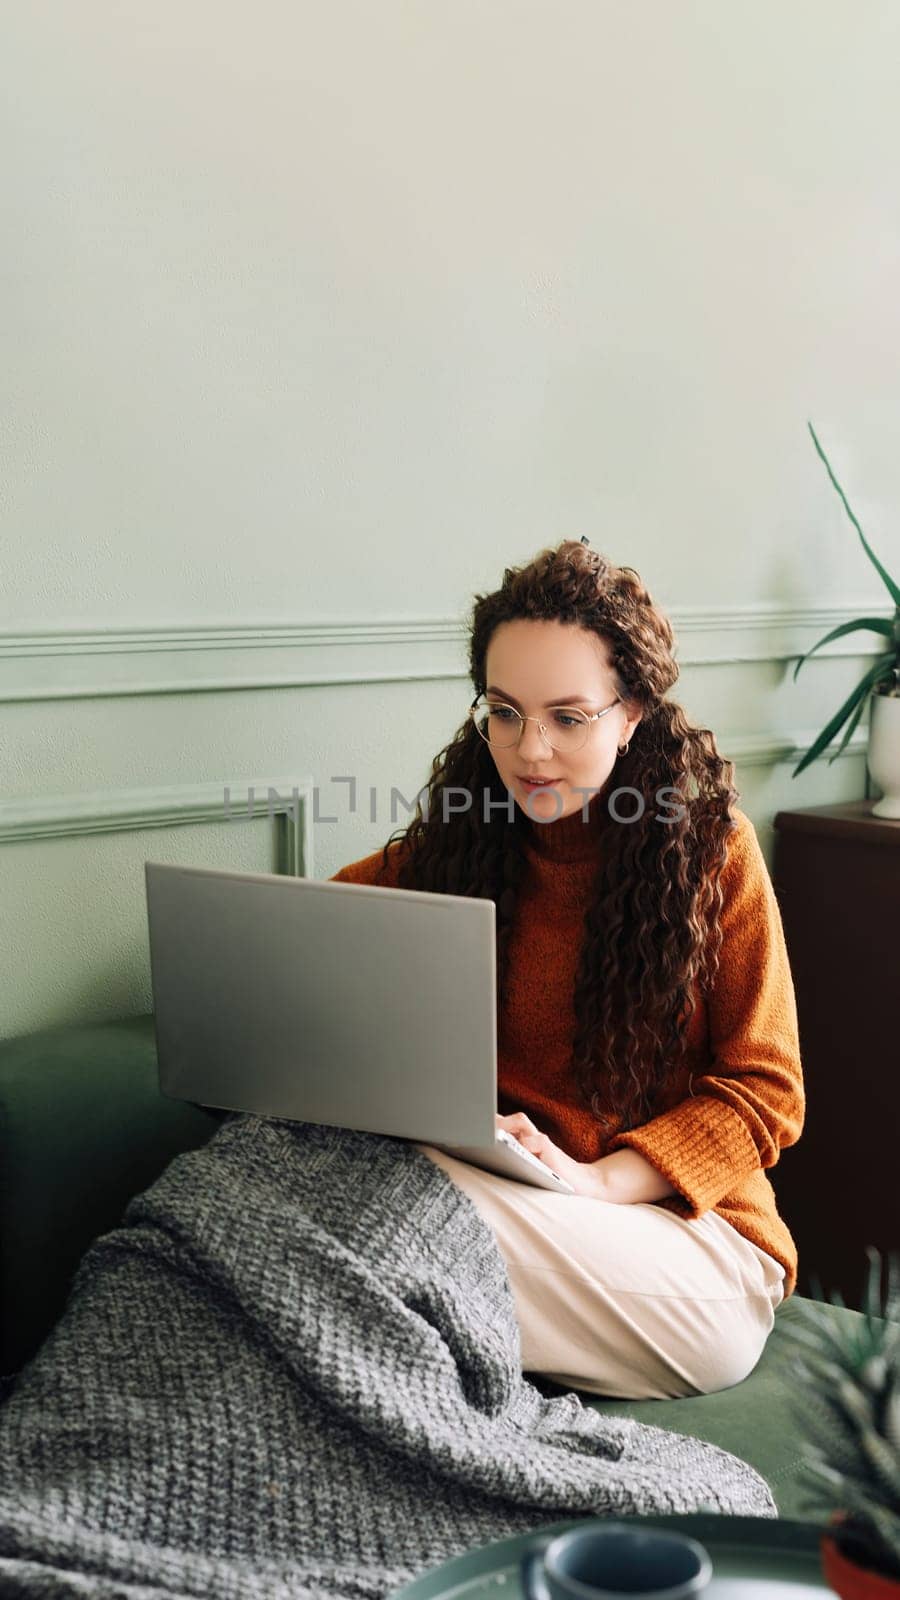 Relaxed young woman sitting on sofa holding mobile phone using cellphone and laptop technology doing online ecommerce shopping, texting messages relaxing on couch in cozy living room home interior